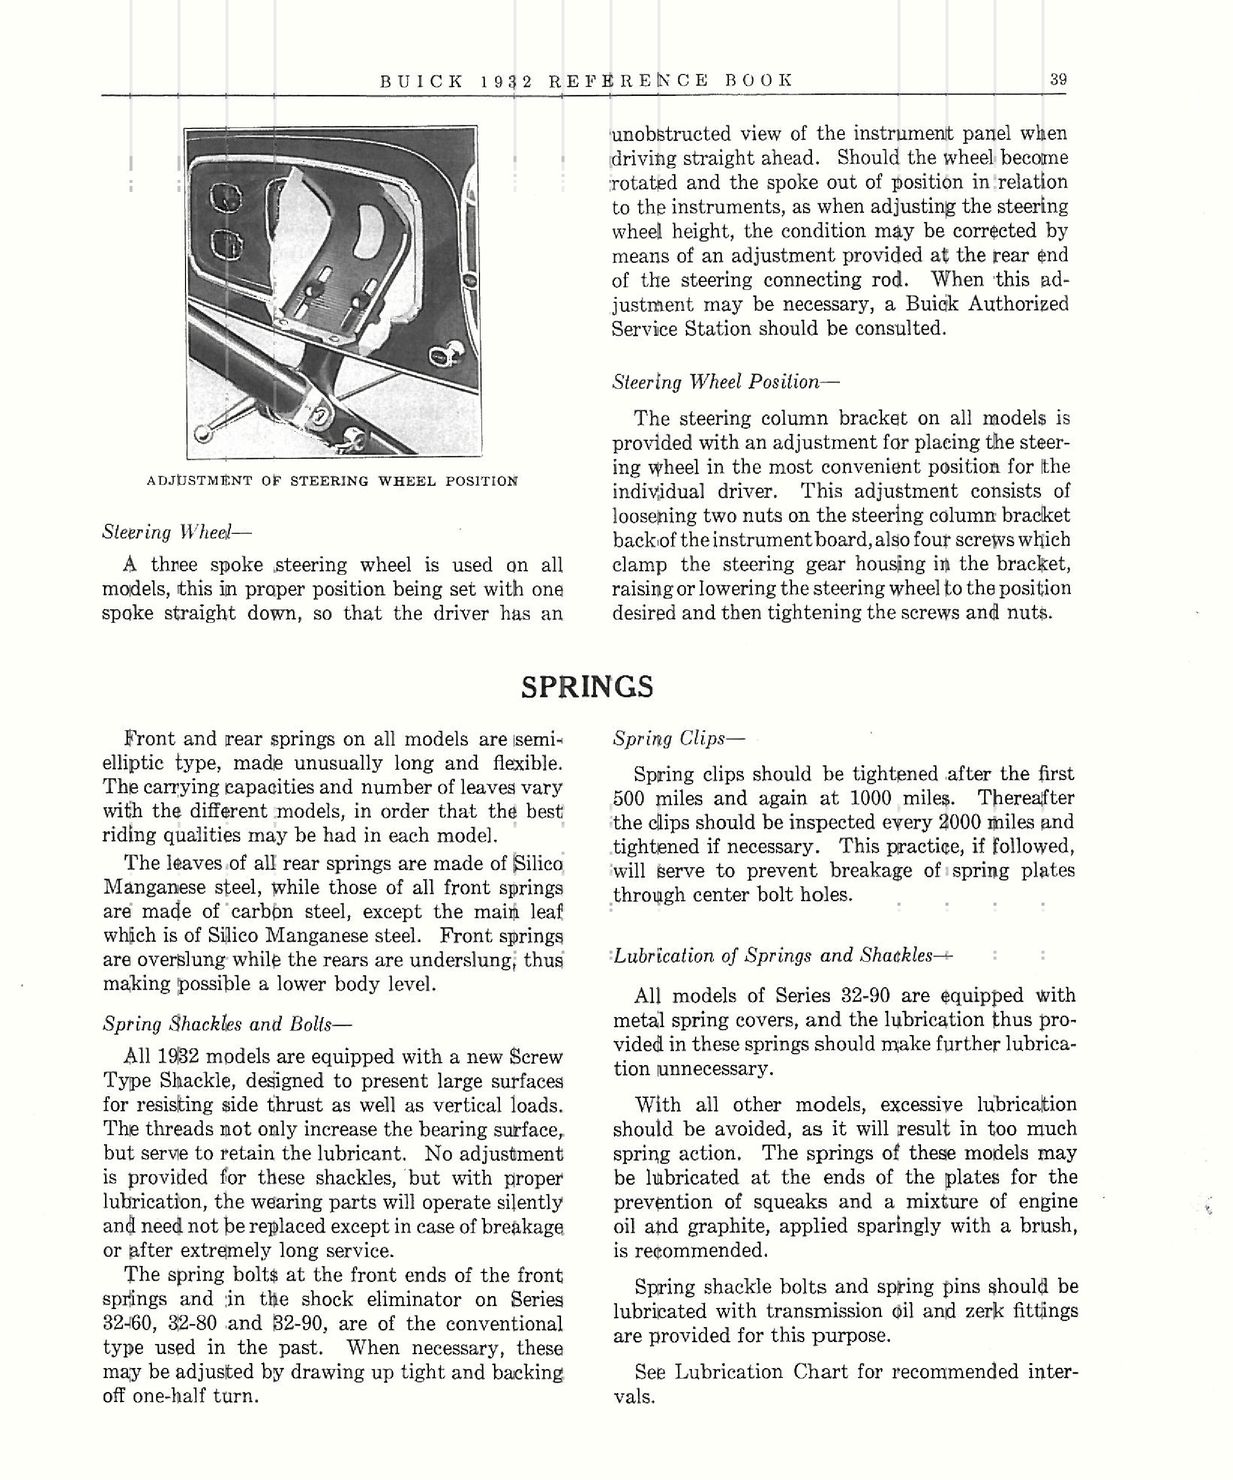 1932 Buick Reference Book-39